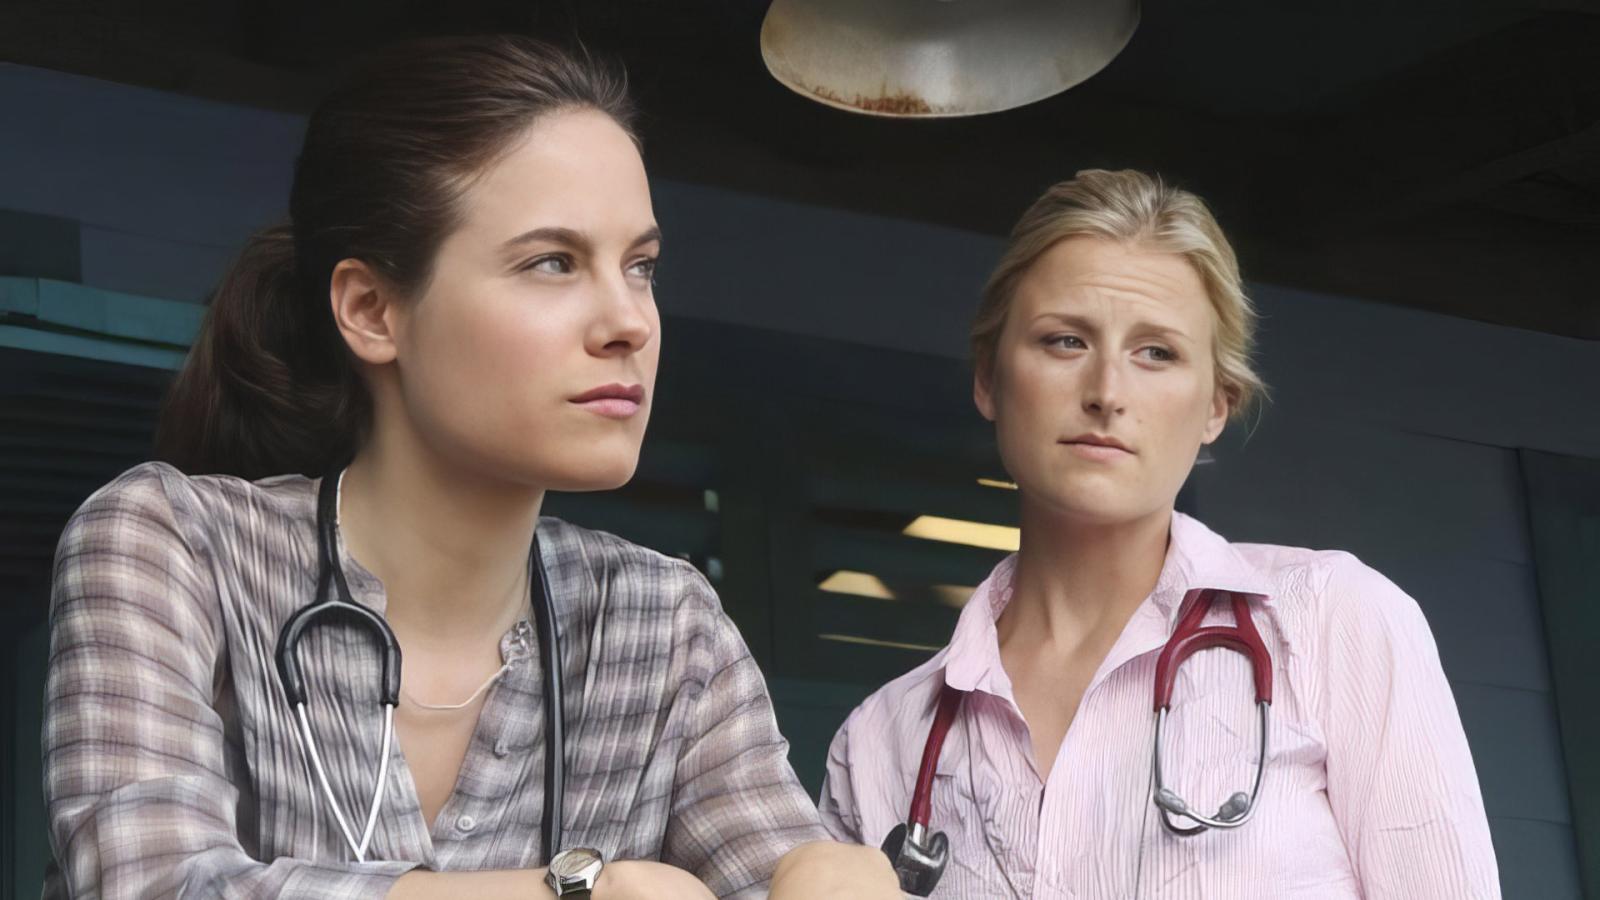 10 Lesser-Known Medical Shows to Binge Instead of Grey's Anatomy - image 3